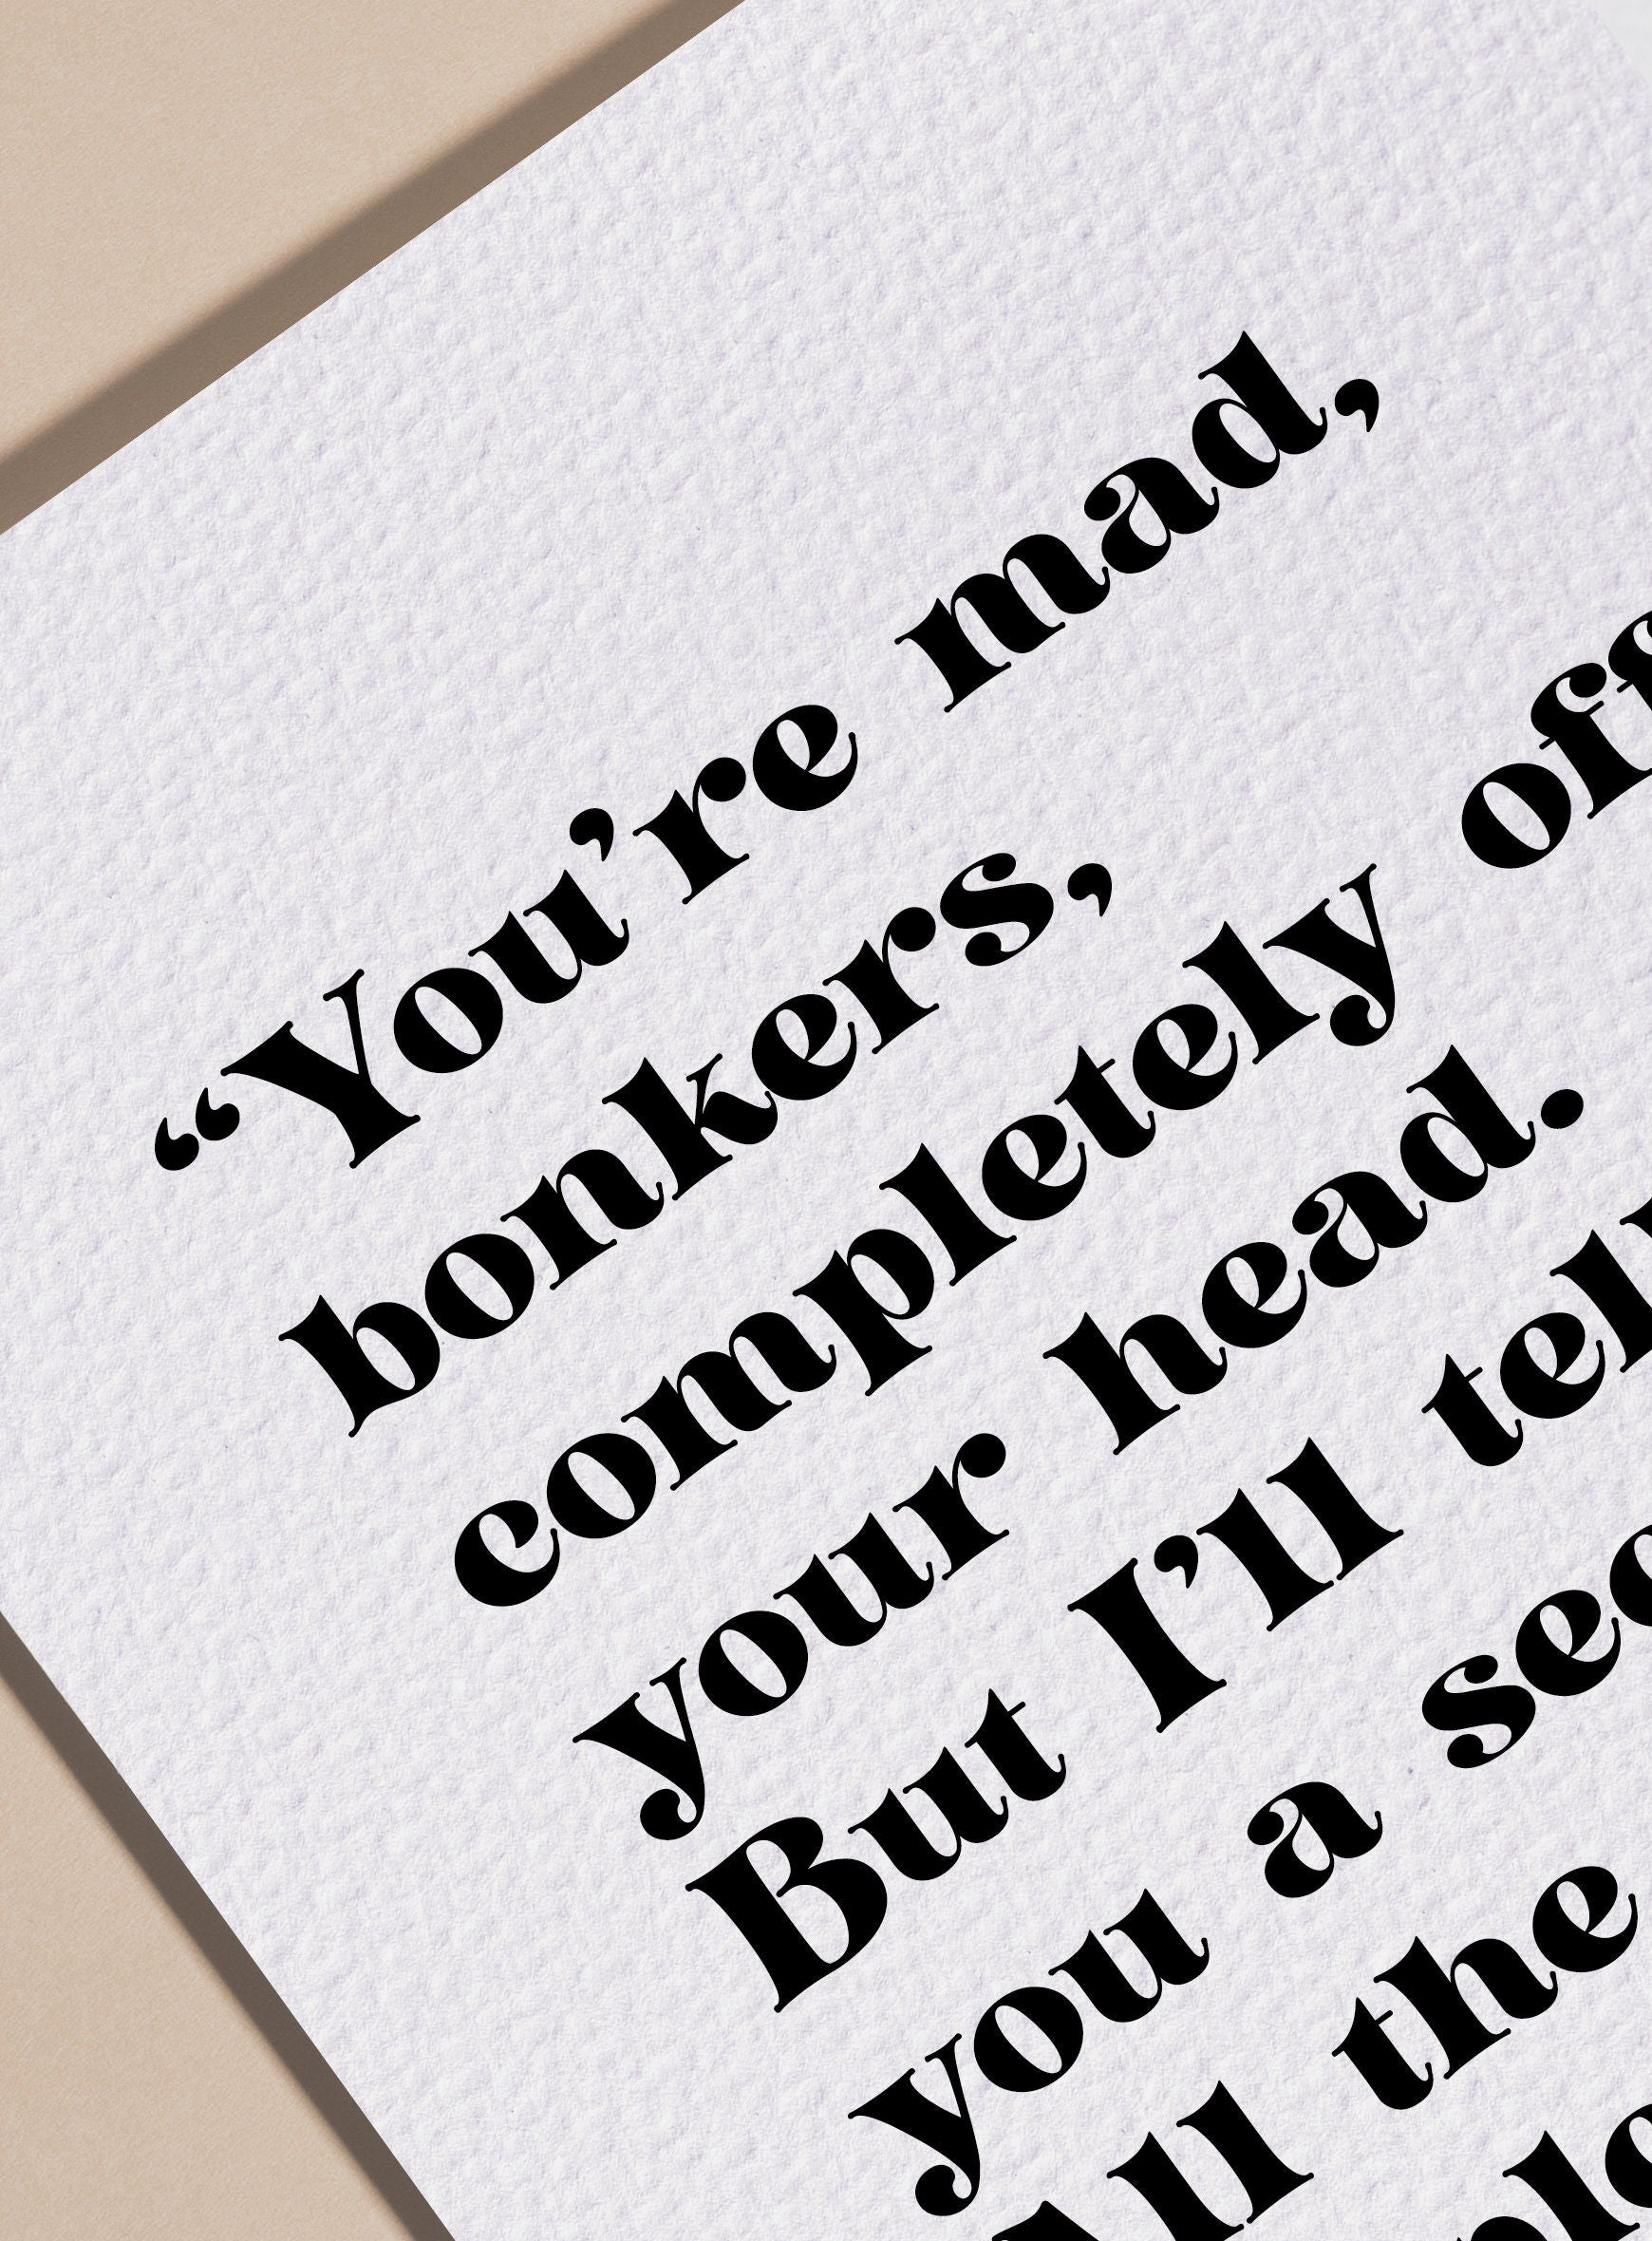 Alice in Wonderland Quote - You're Mad Bonkers Print - Mad Hatter Poster - Lewis Carroll Framed Quote - You're Mad Bonkers Quote Book Quotes